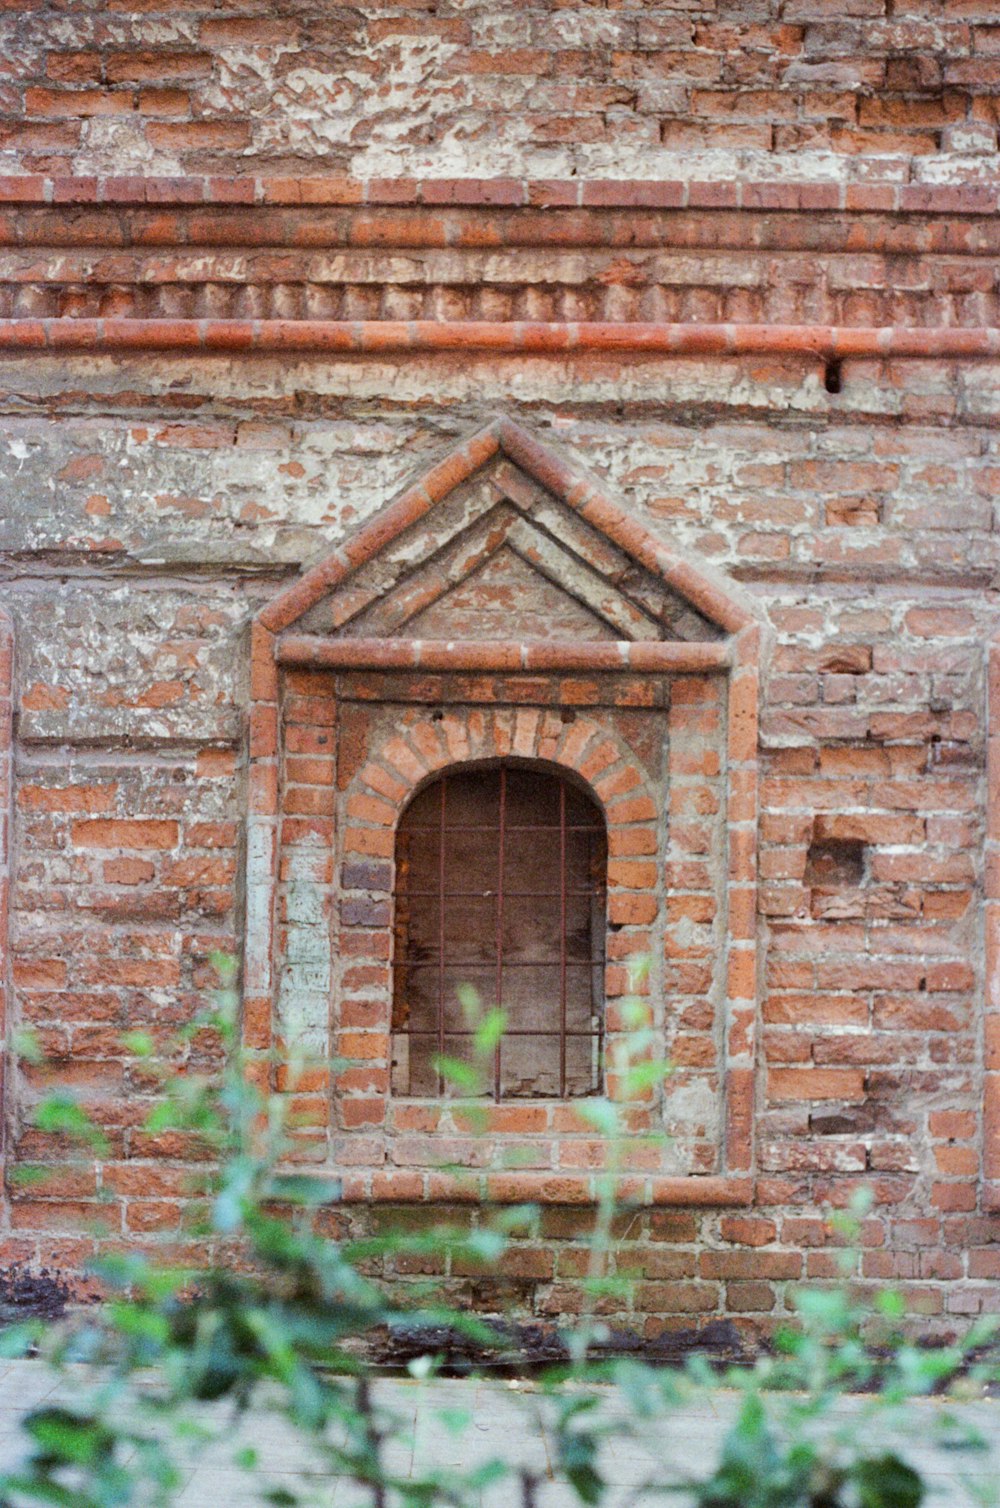 an old brick building with a window and bars